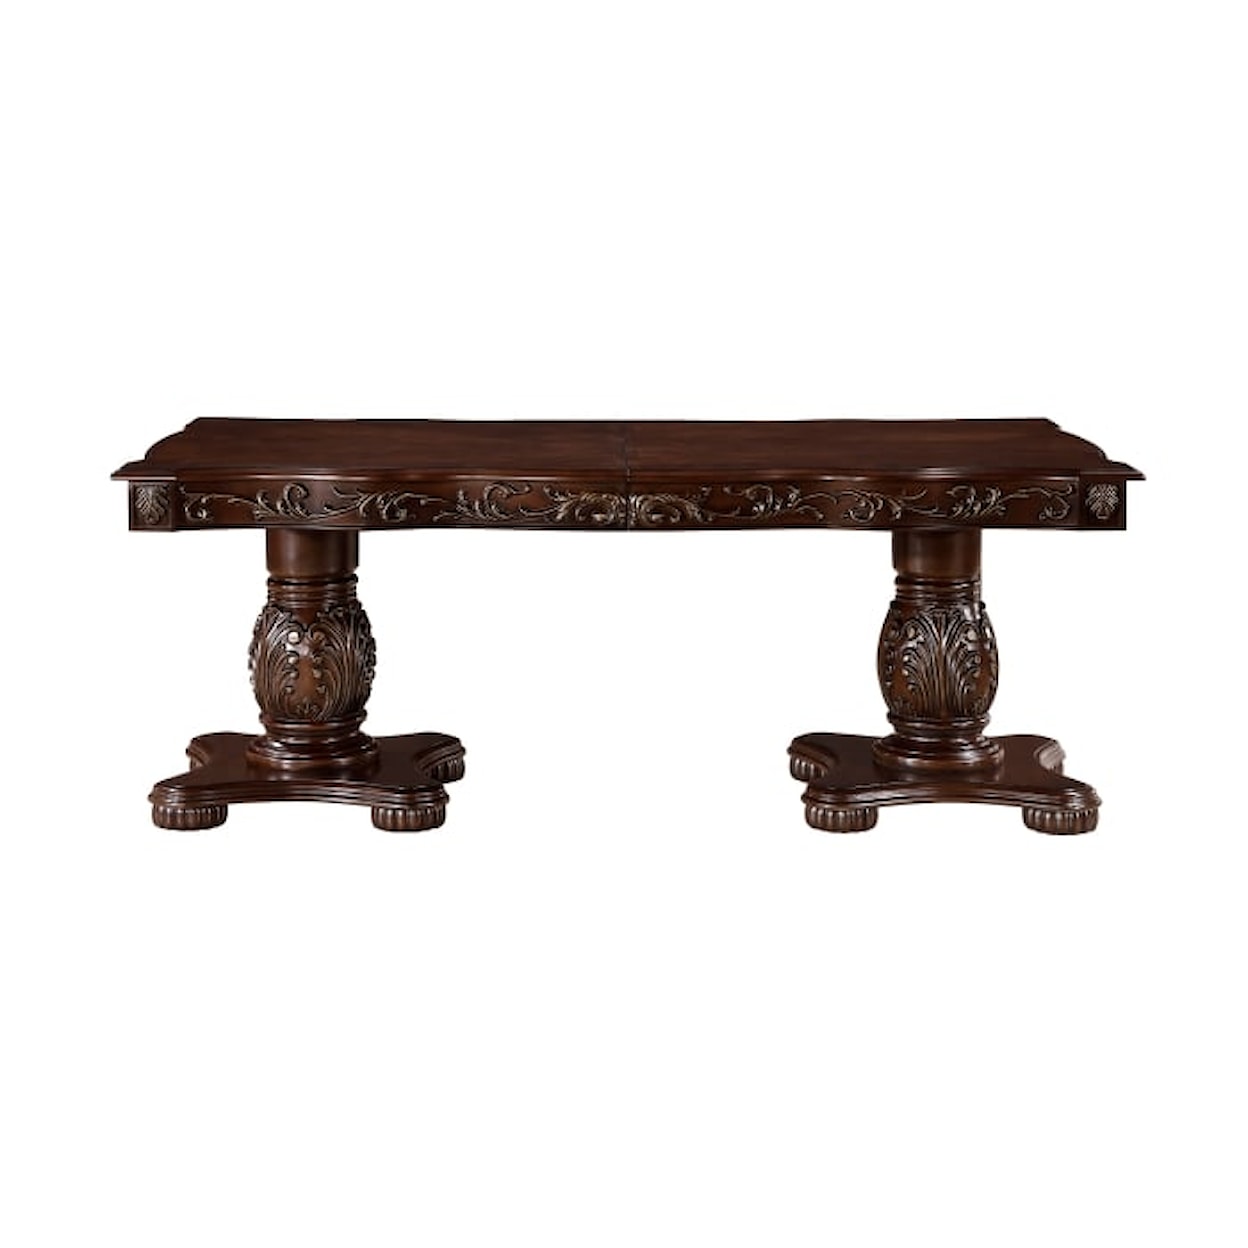 Homelegance Adelina Dining Table